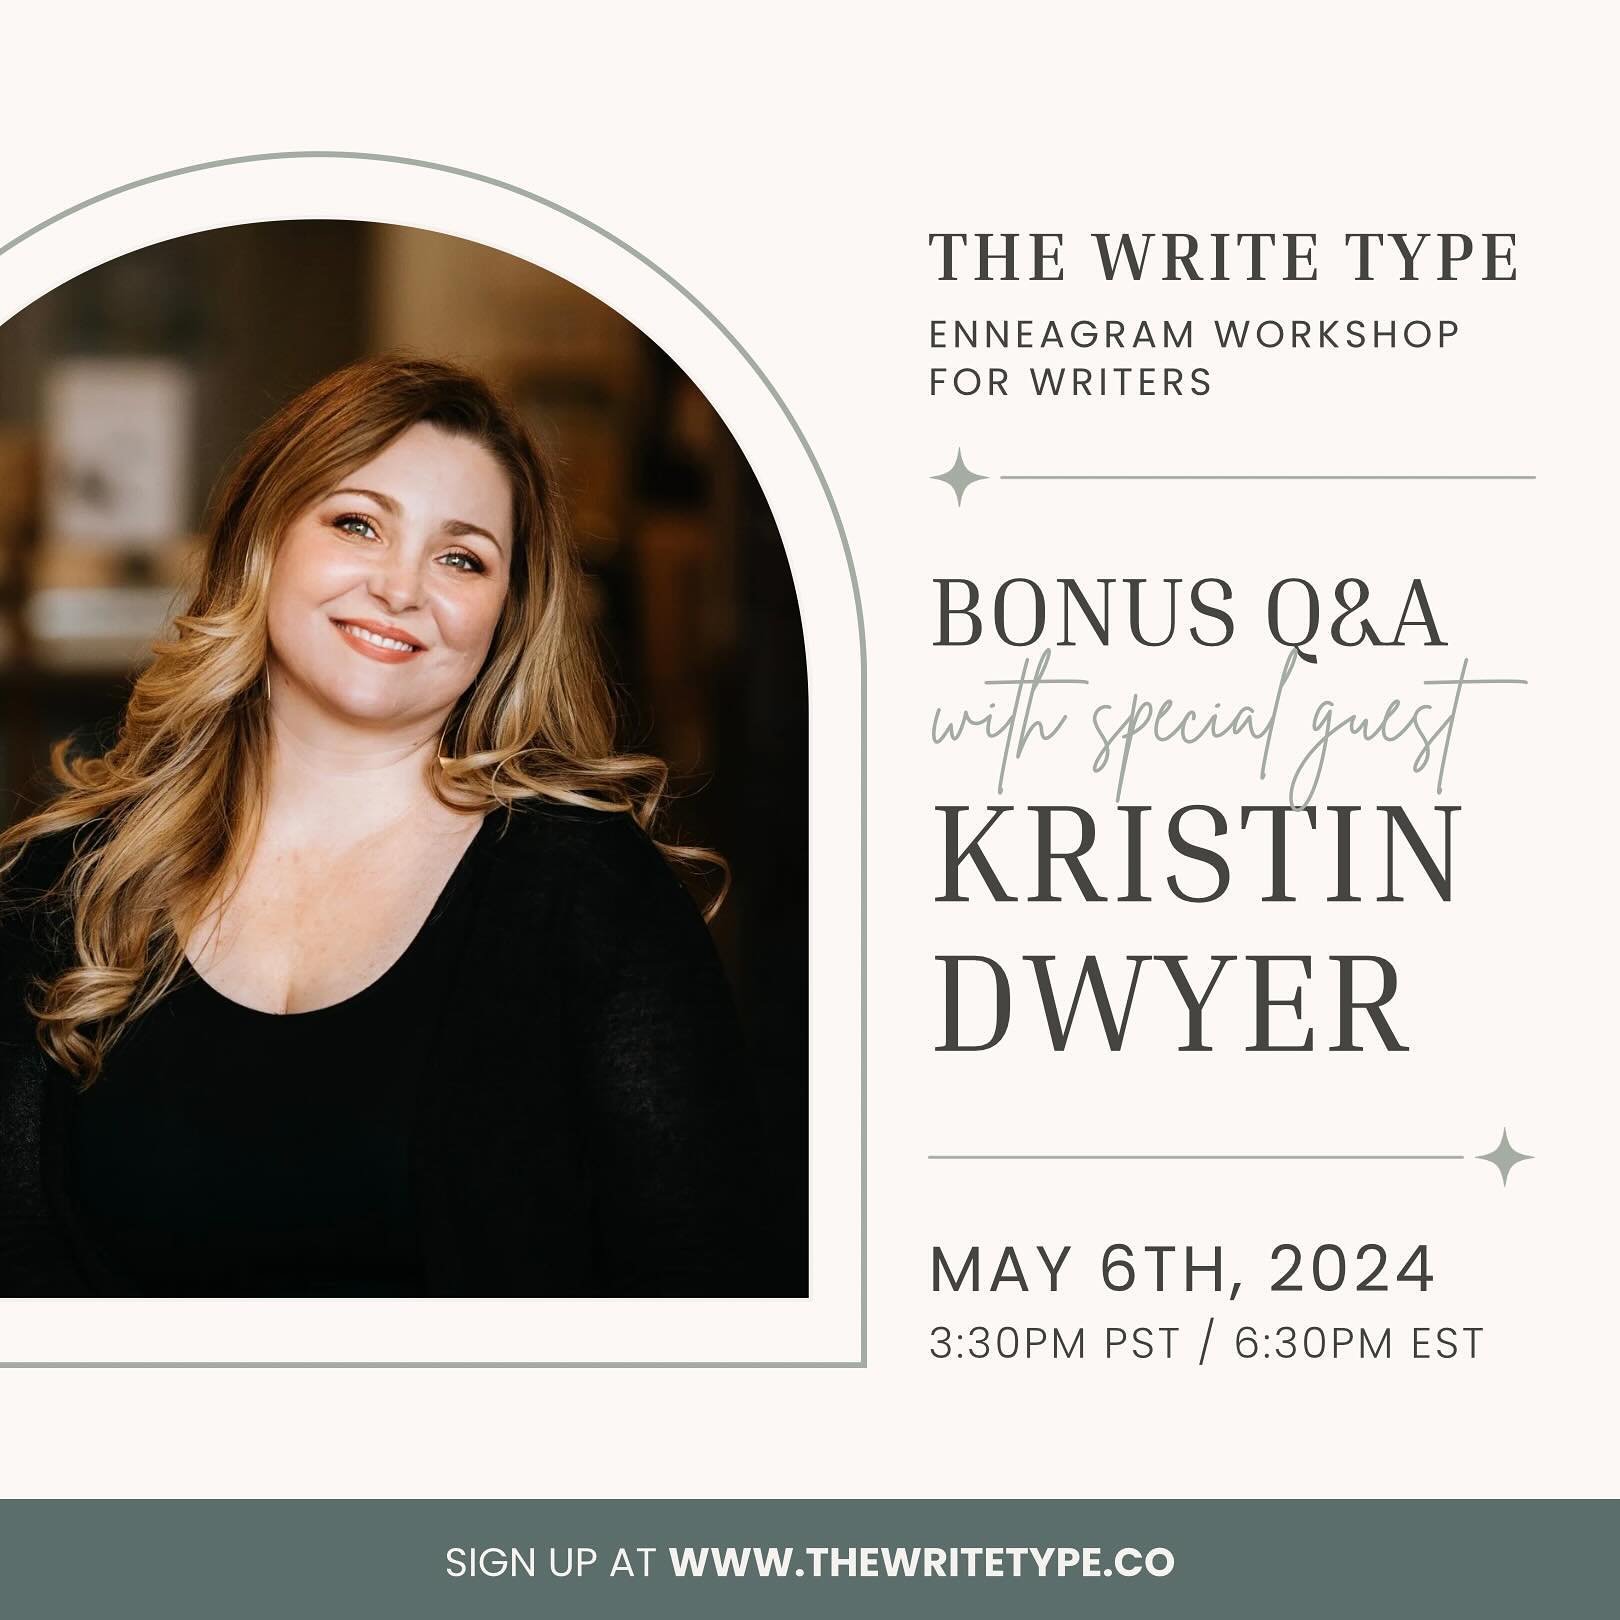 Exciting news!! Special guest ✨ Kristin Dwyer ✨ will be joining us in the Enneagram Course for Writers for a LIVE Q&amp;A on the bonus day (May 6th, 2024 at 6:30pm EST). We&rsquo;ll chat all about what it&rsquo;s like to be an Enneagram 7 with an 8 w